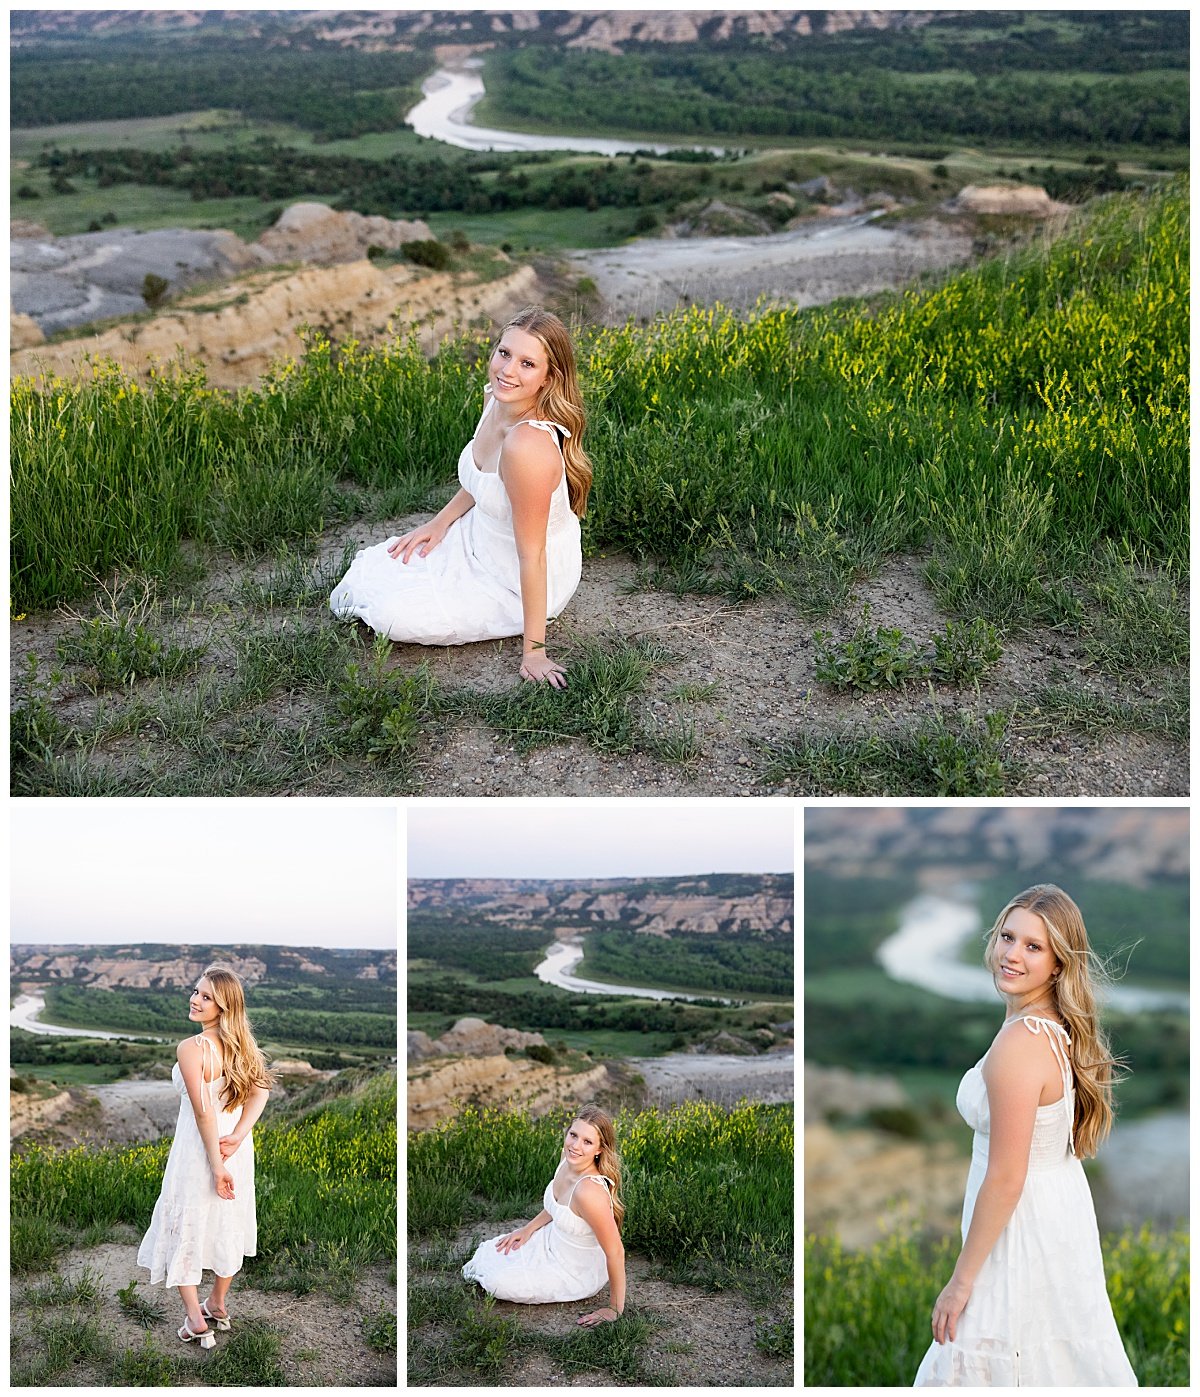 A senior girl is shown in a white dress at golden hour during her senior photoshoot.